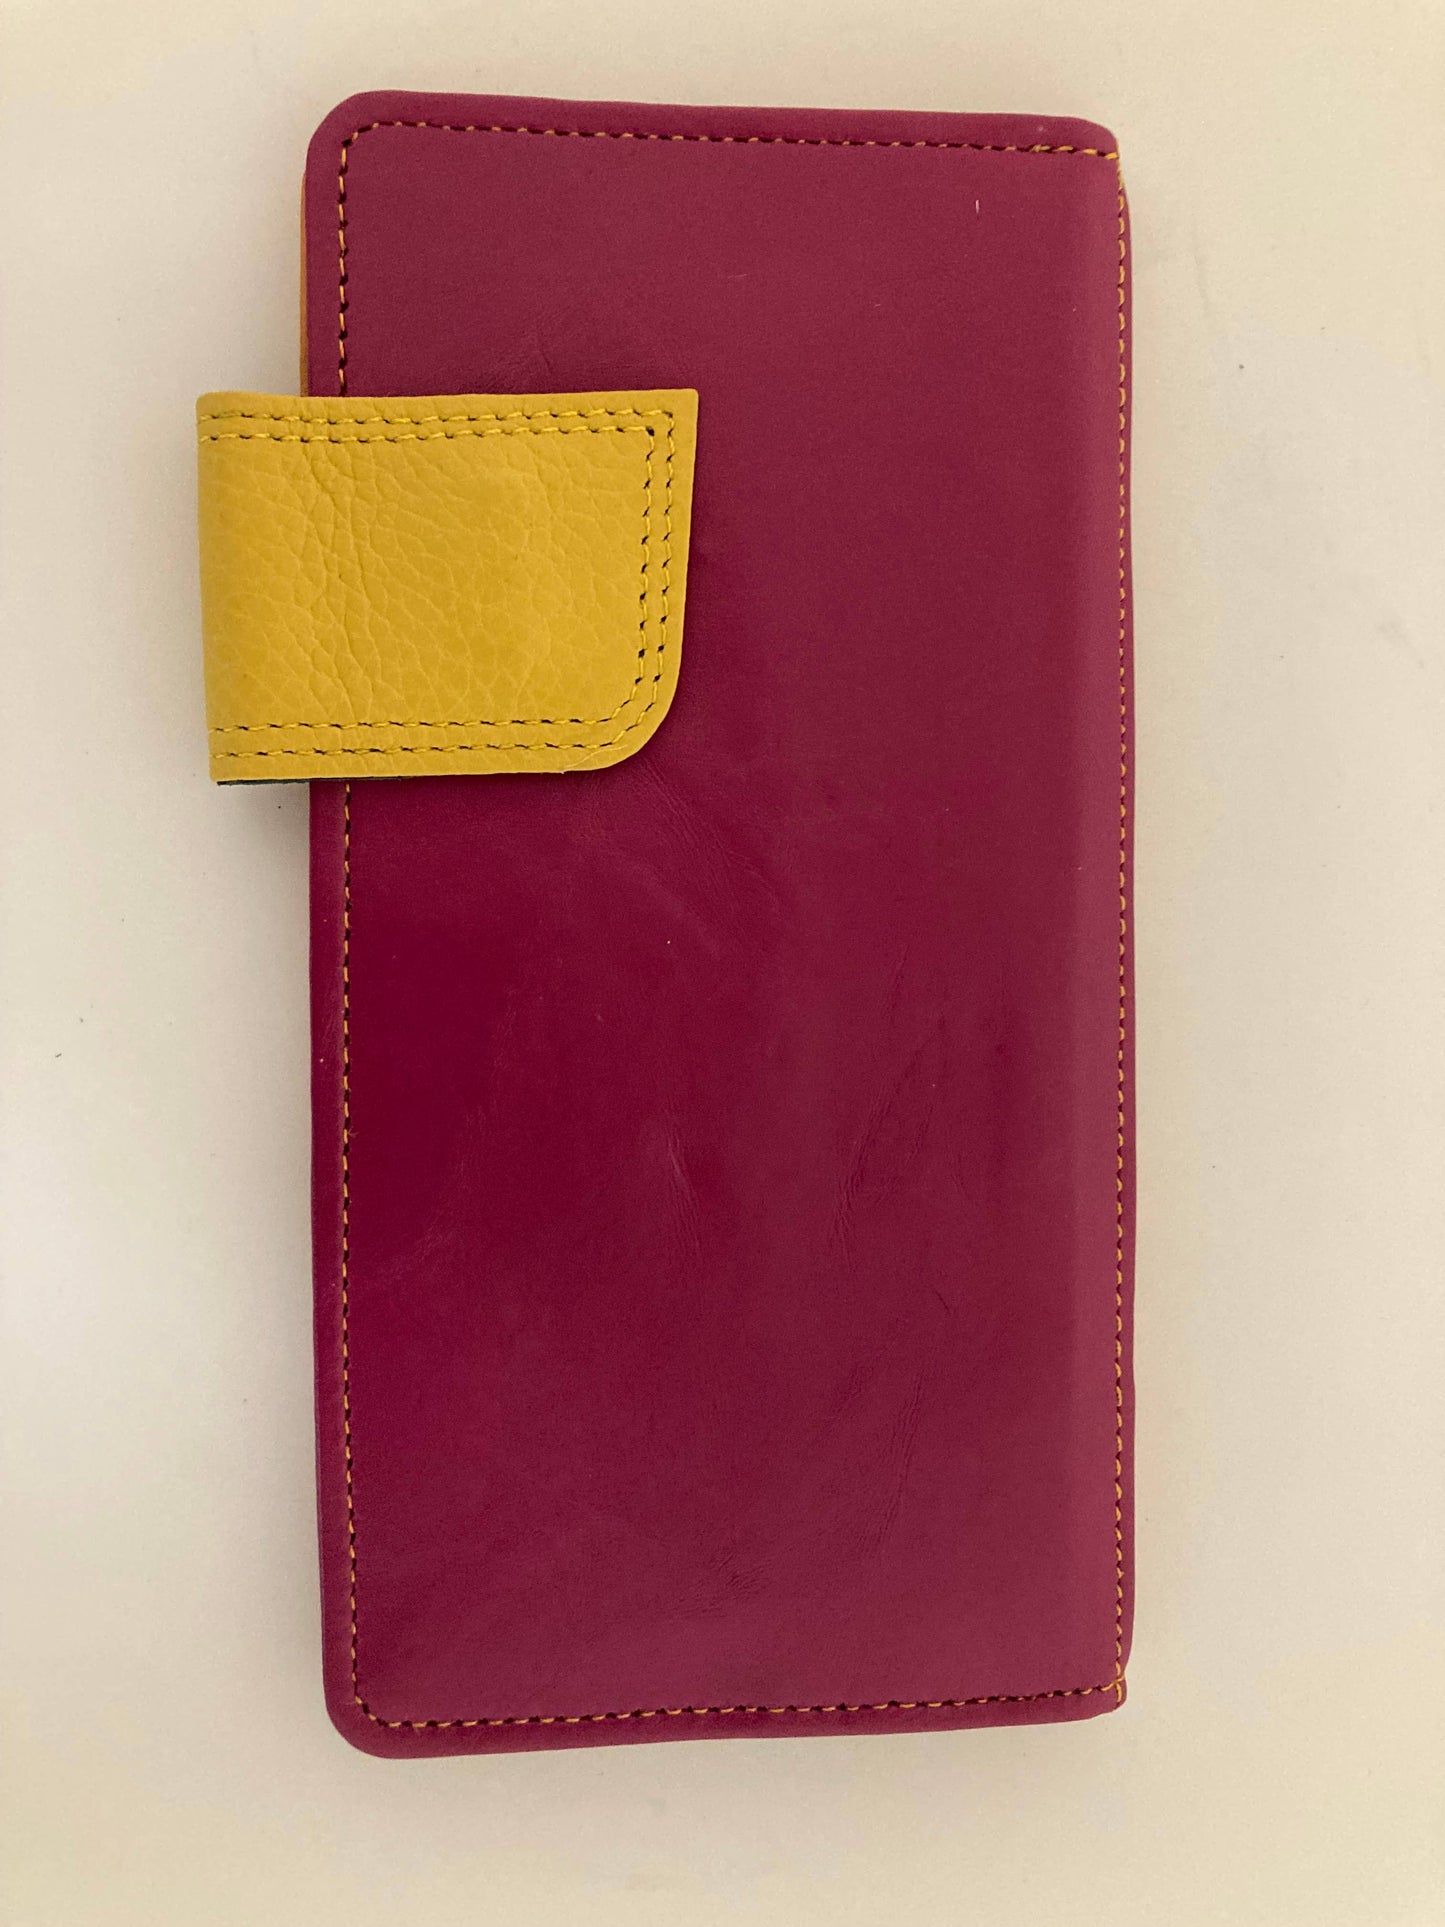 Recycled Coloured Leather Purse - Maroon with Yellow